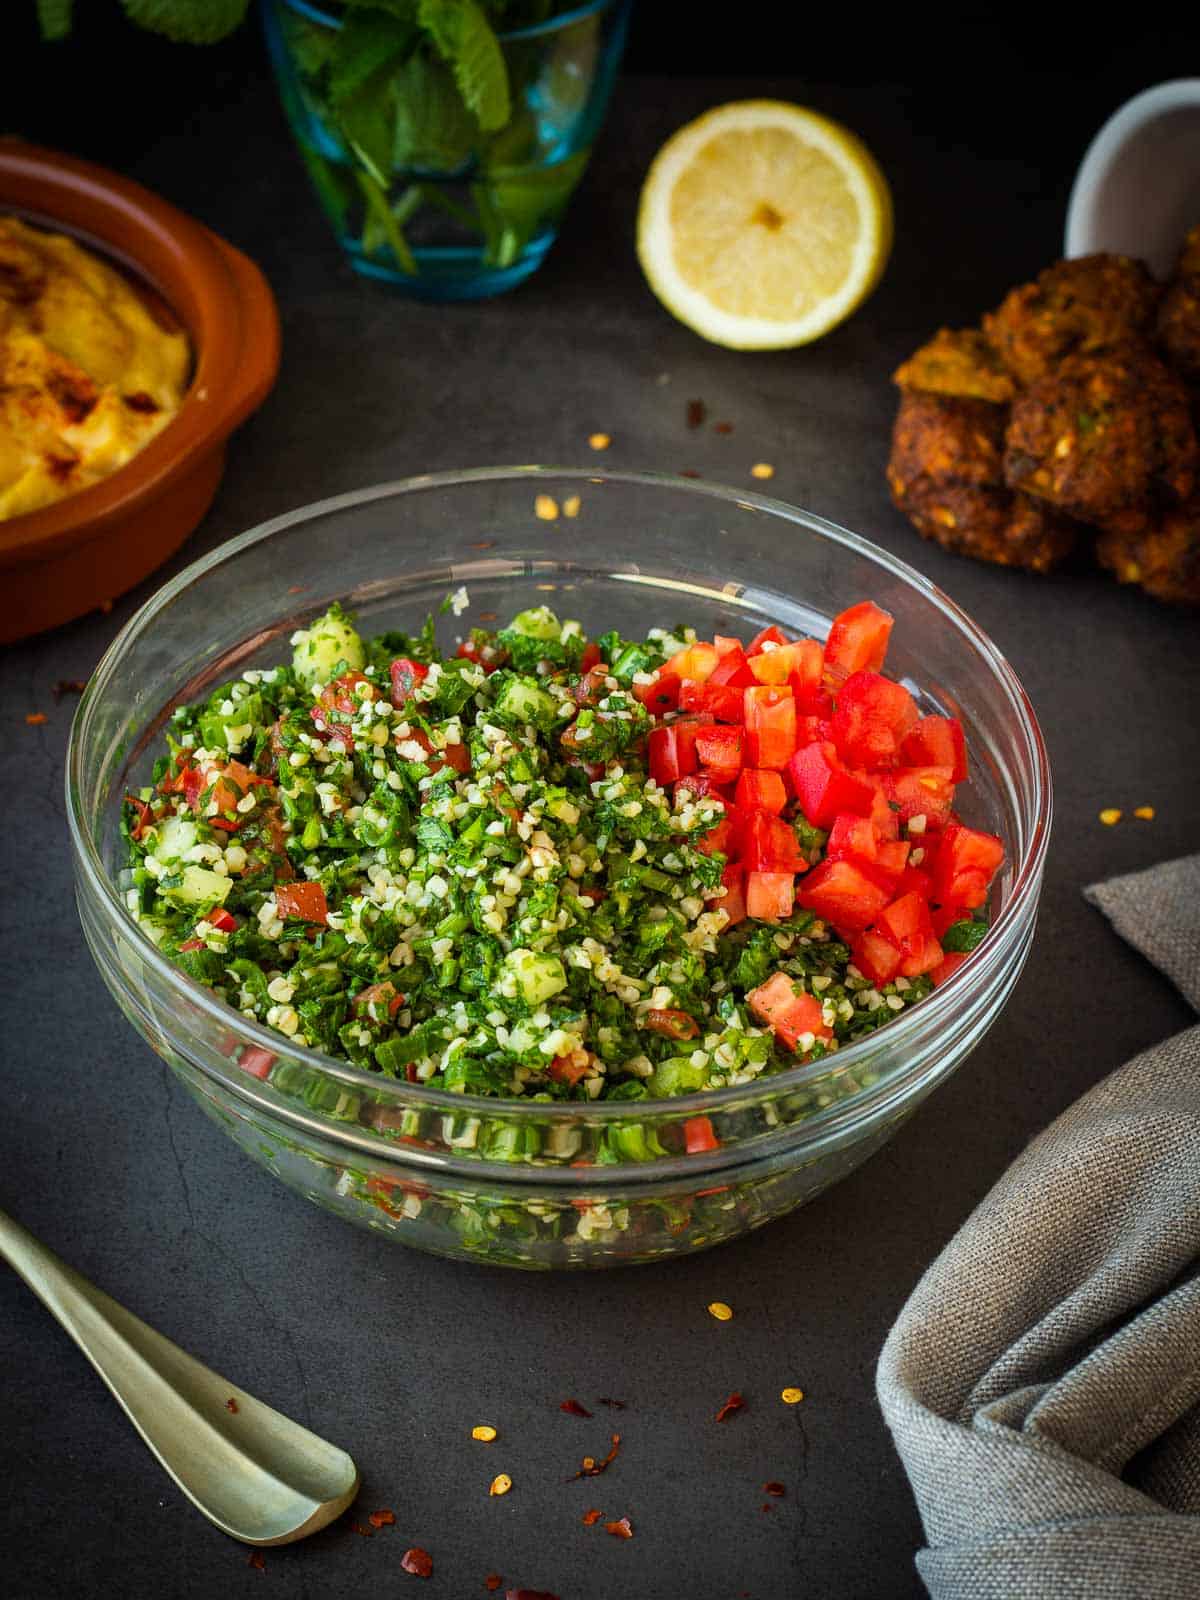 Tabbouleh Salad with Hummus served with Falafel.